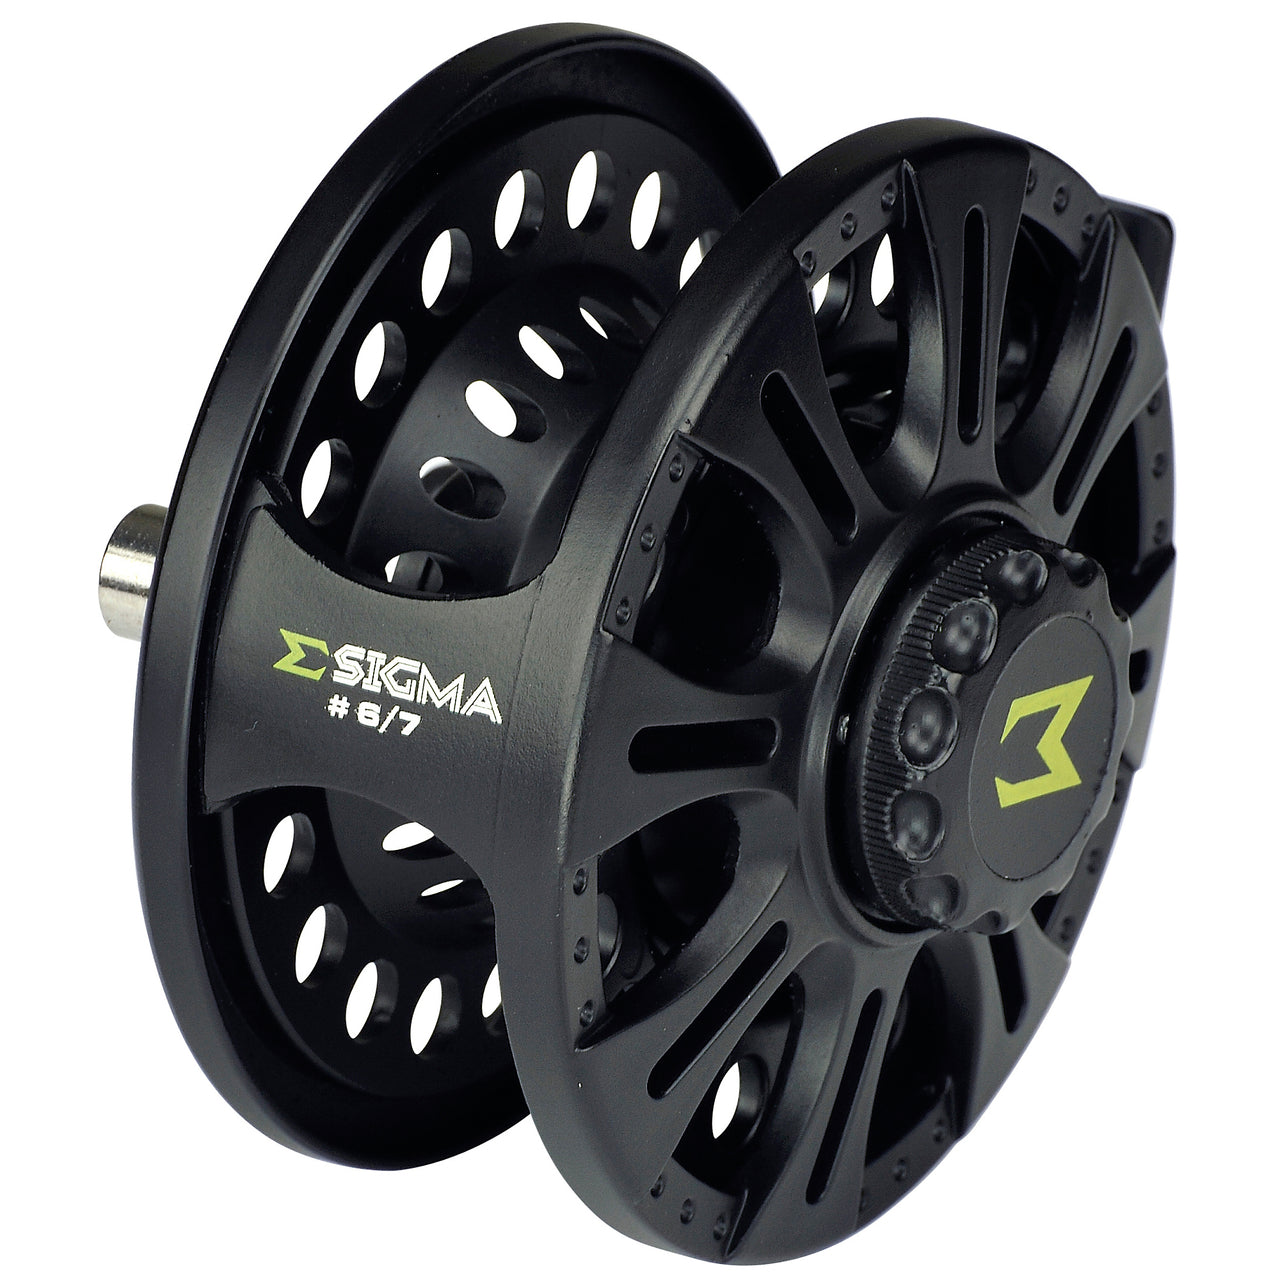 Shakespeare Cedar Canyon Click Fly Reel #7/8 for Fly Fishing